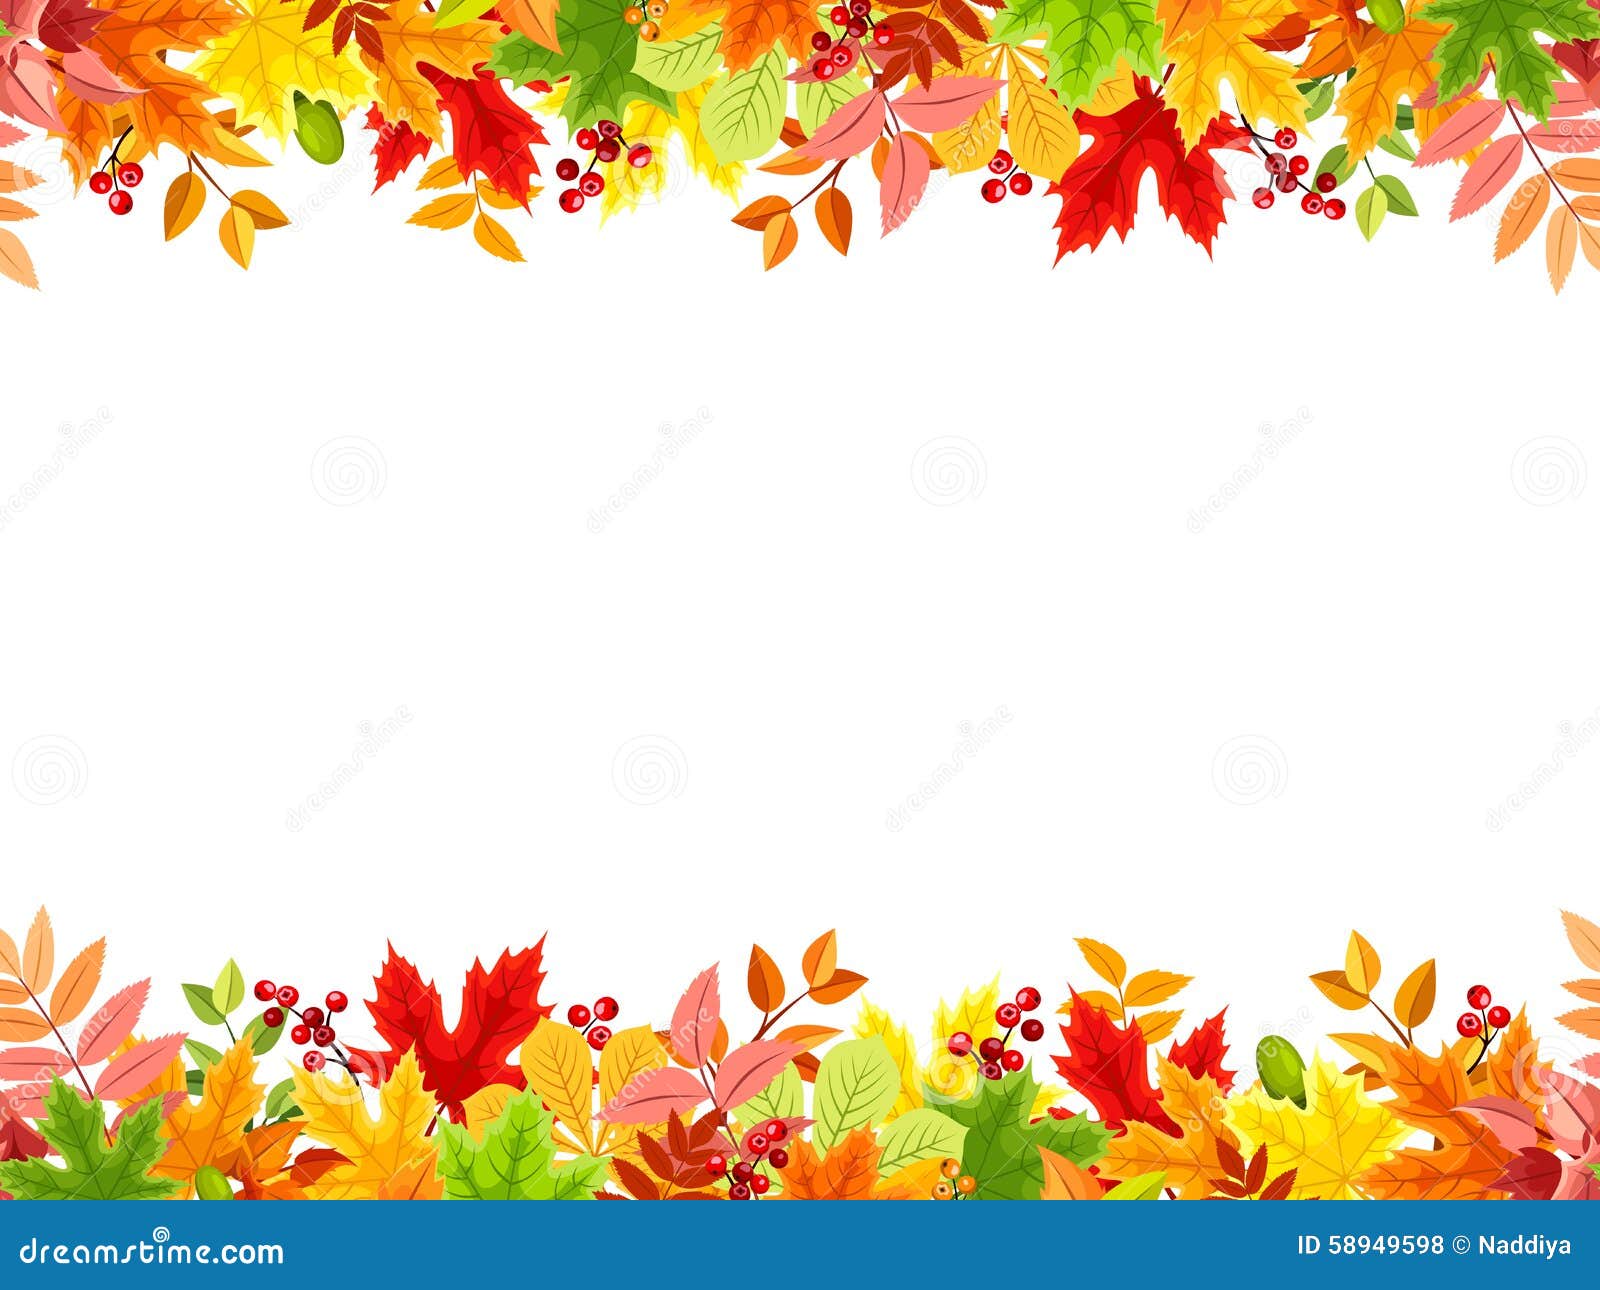 horizontal seamless background with colorful autumn leaves.  .